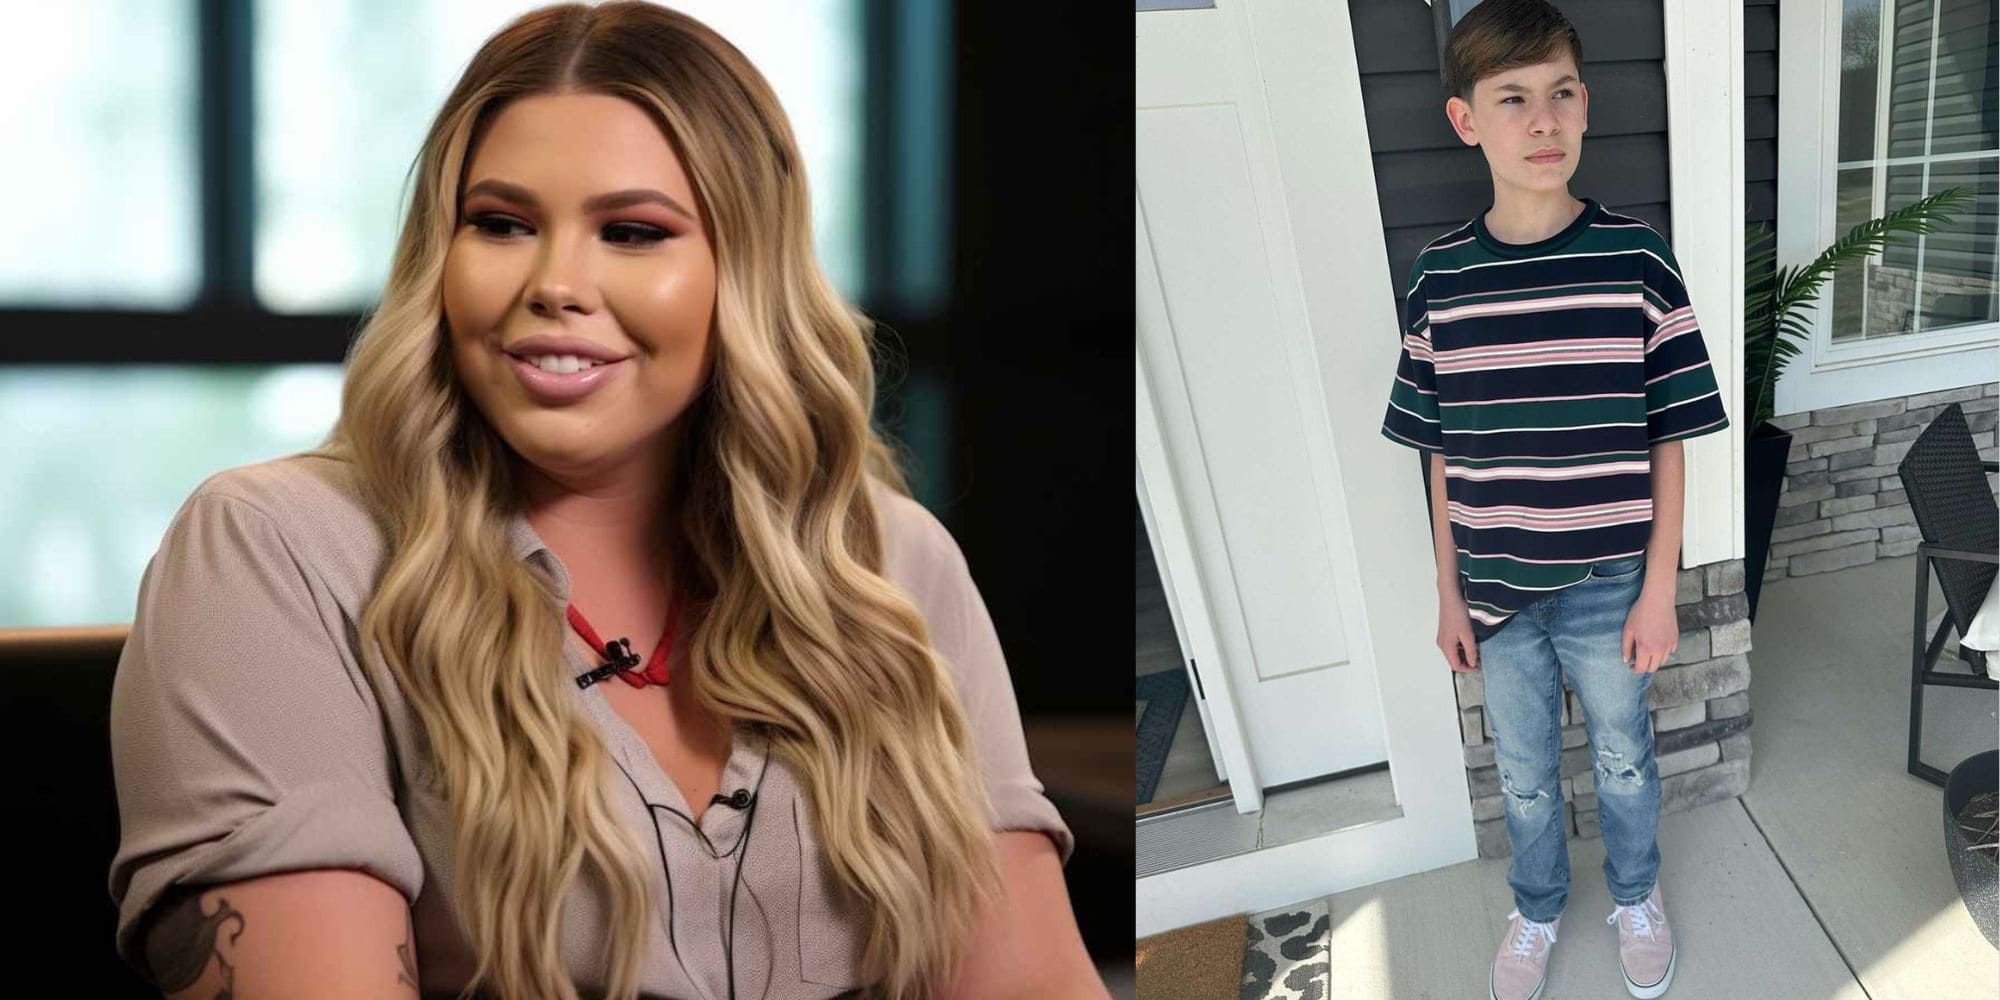 Isaac, at the Age of 14, is Kailyn Lowry's Initial Son and the First of Her Children, though Not the Final One